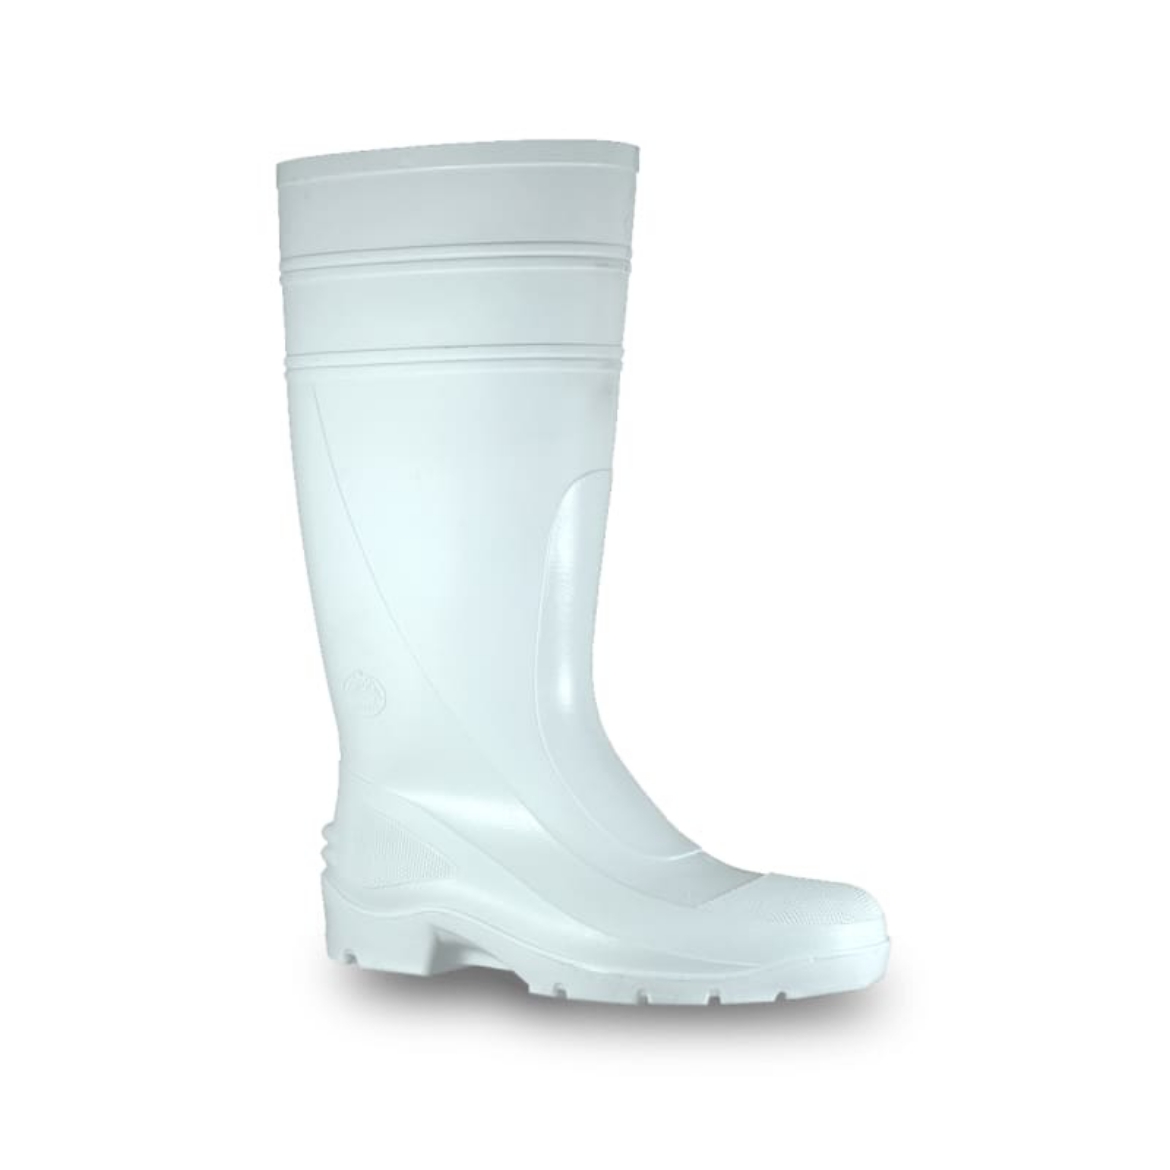 Picture of Bata Industrials, Utility, Safety Toe Boot, PVC 400mm